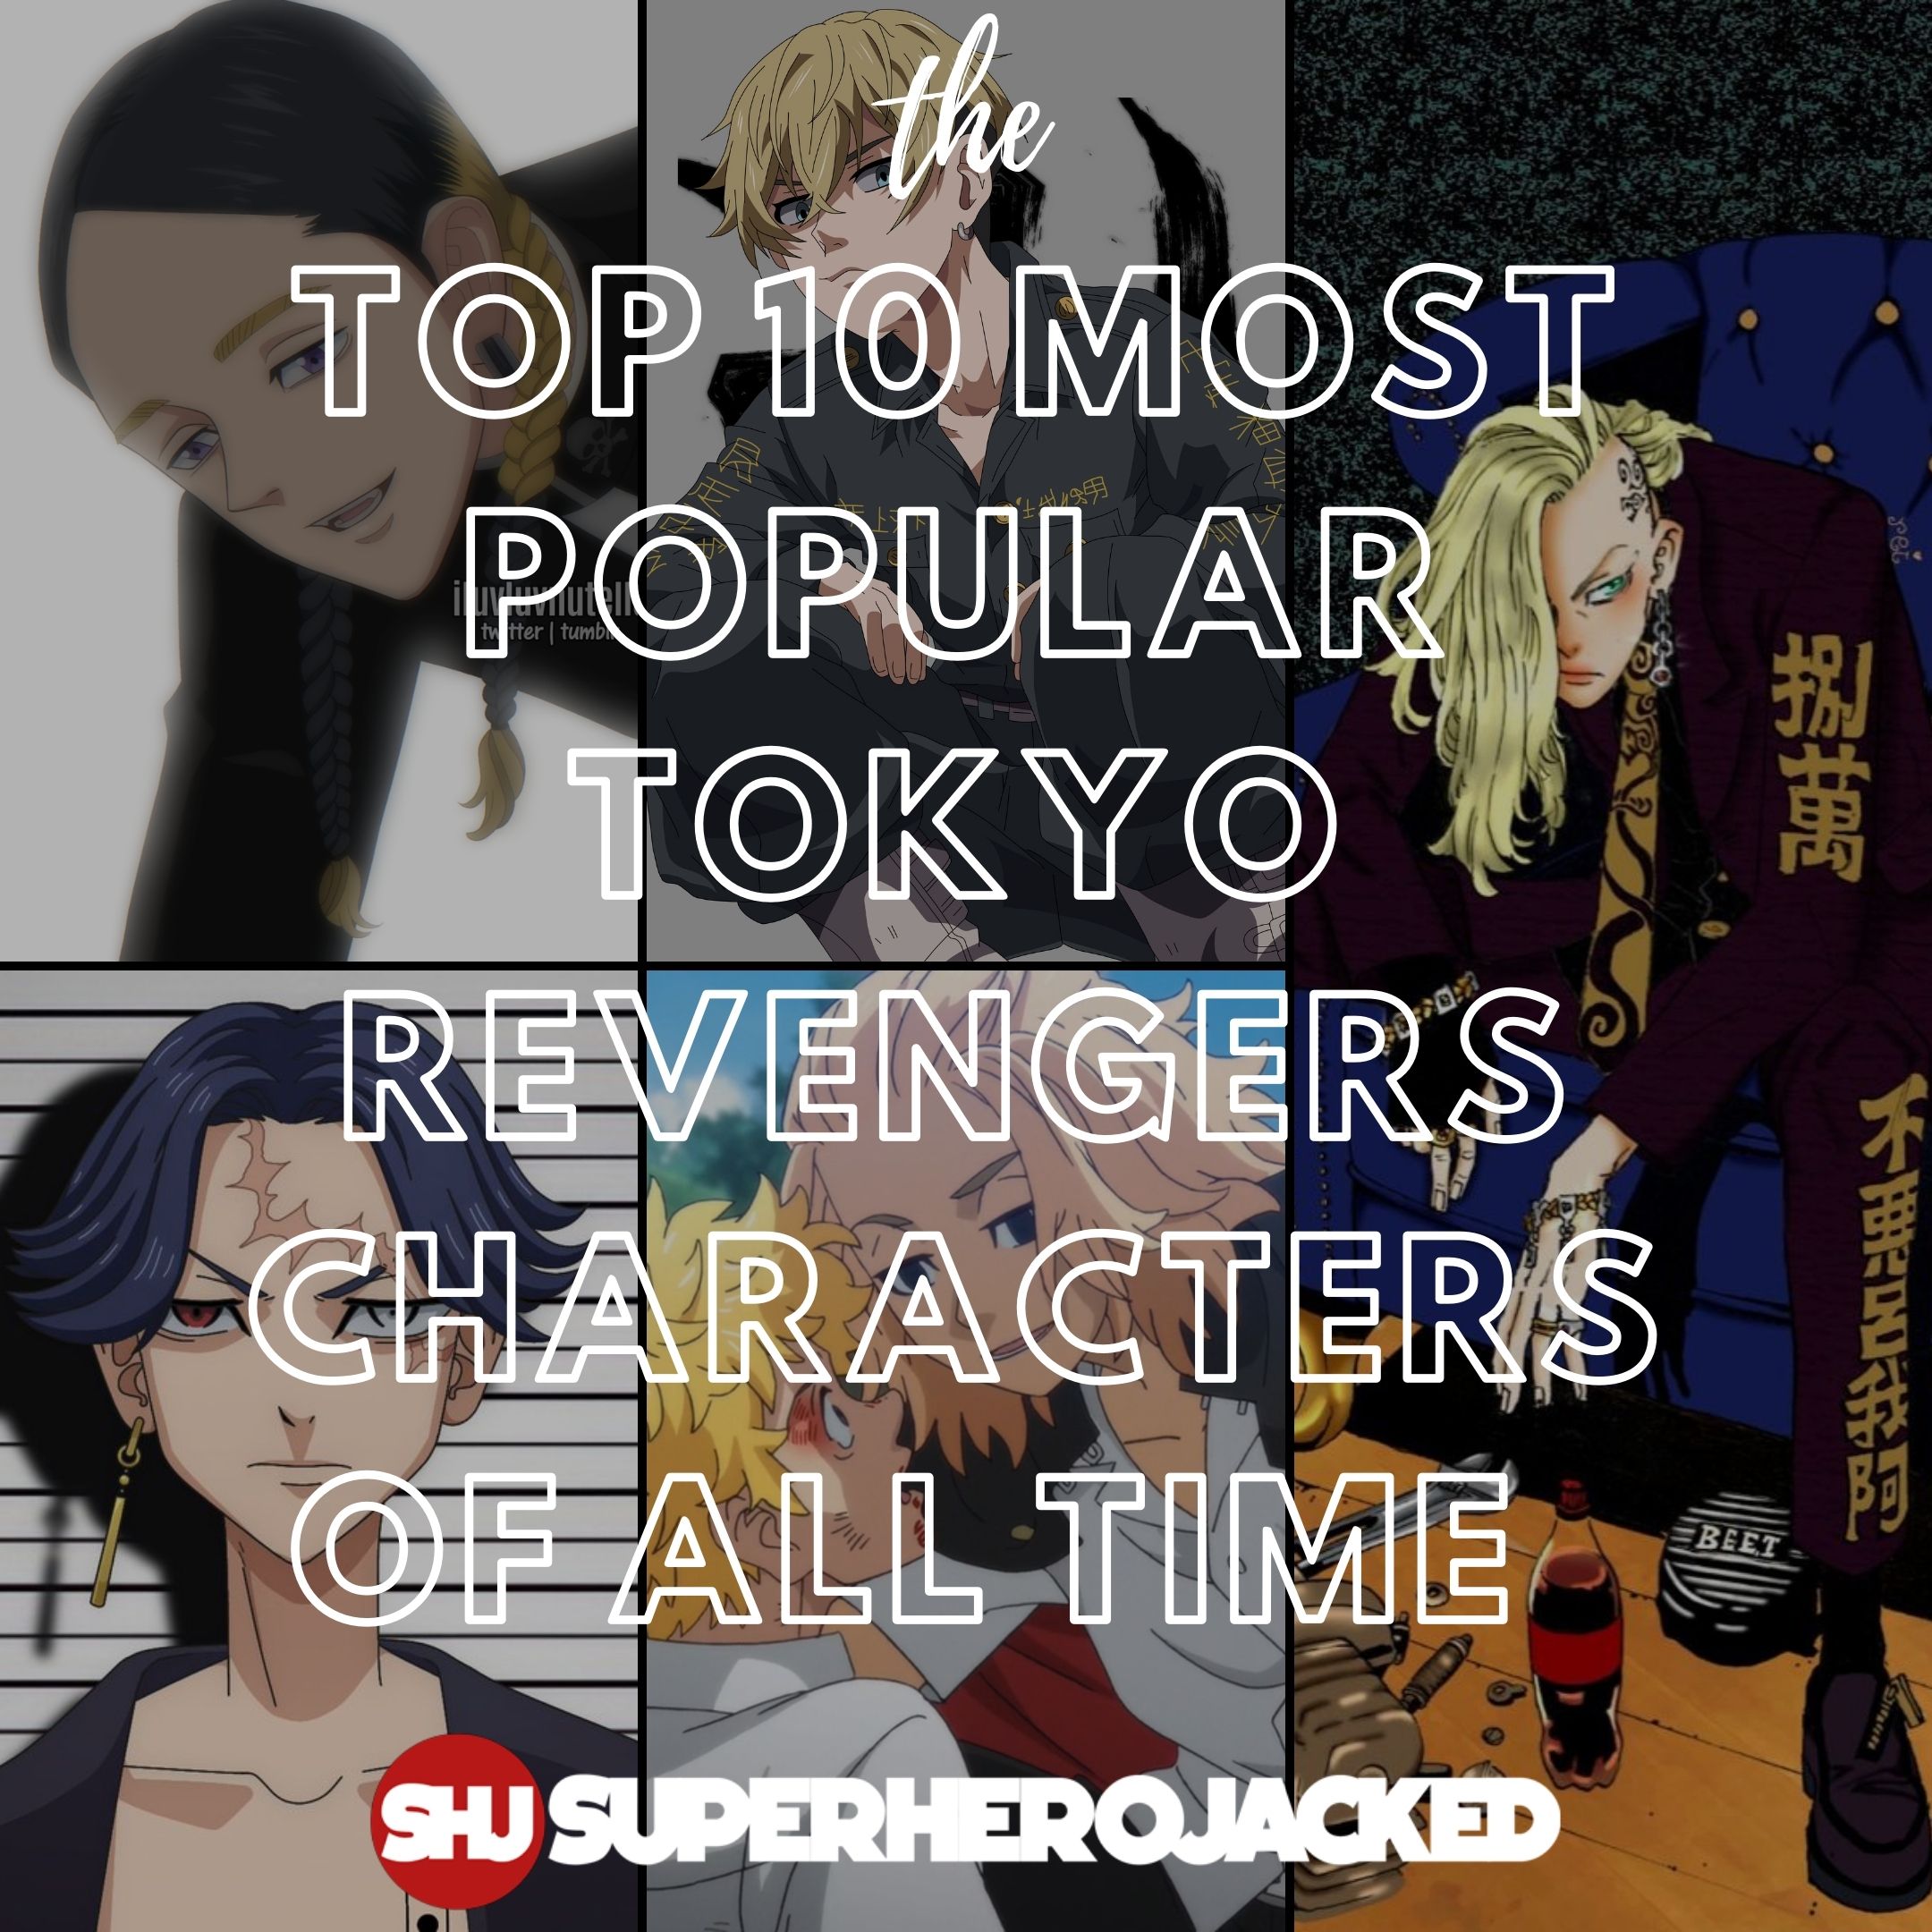 Top 10 Most Popular Tokyo Revengers Characters of All Time